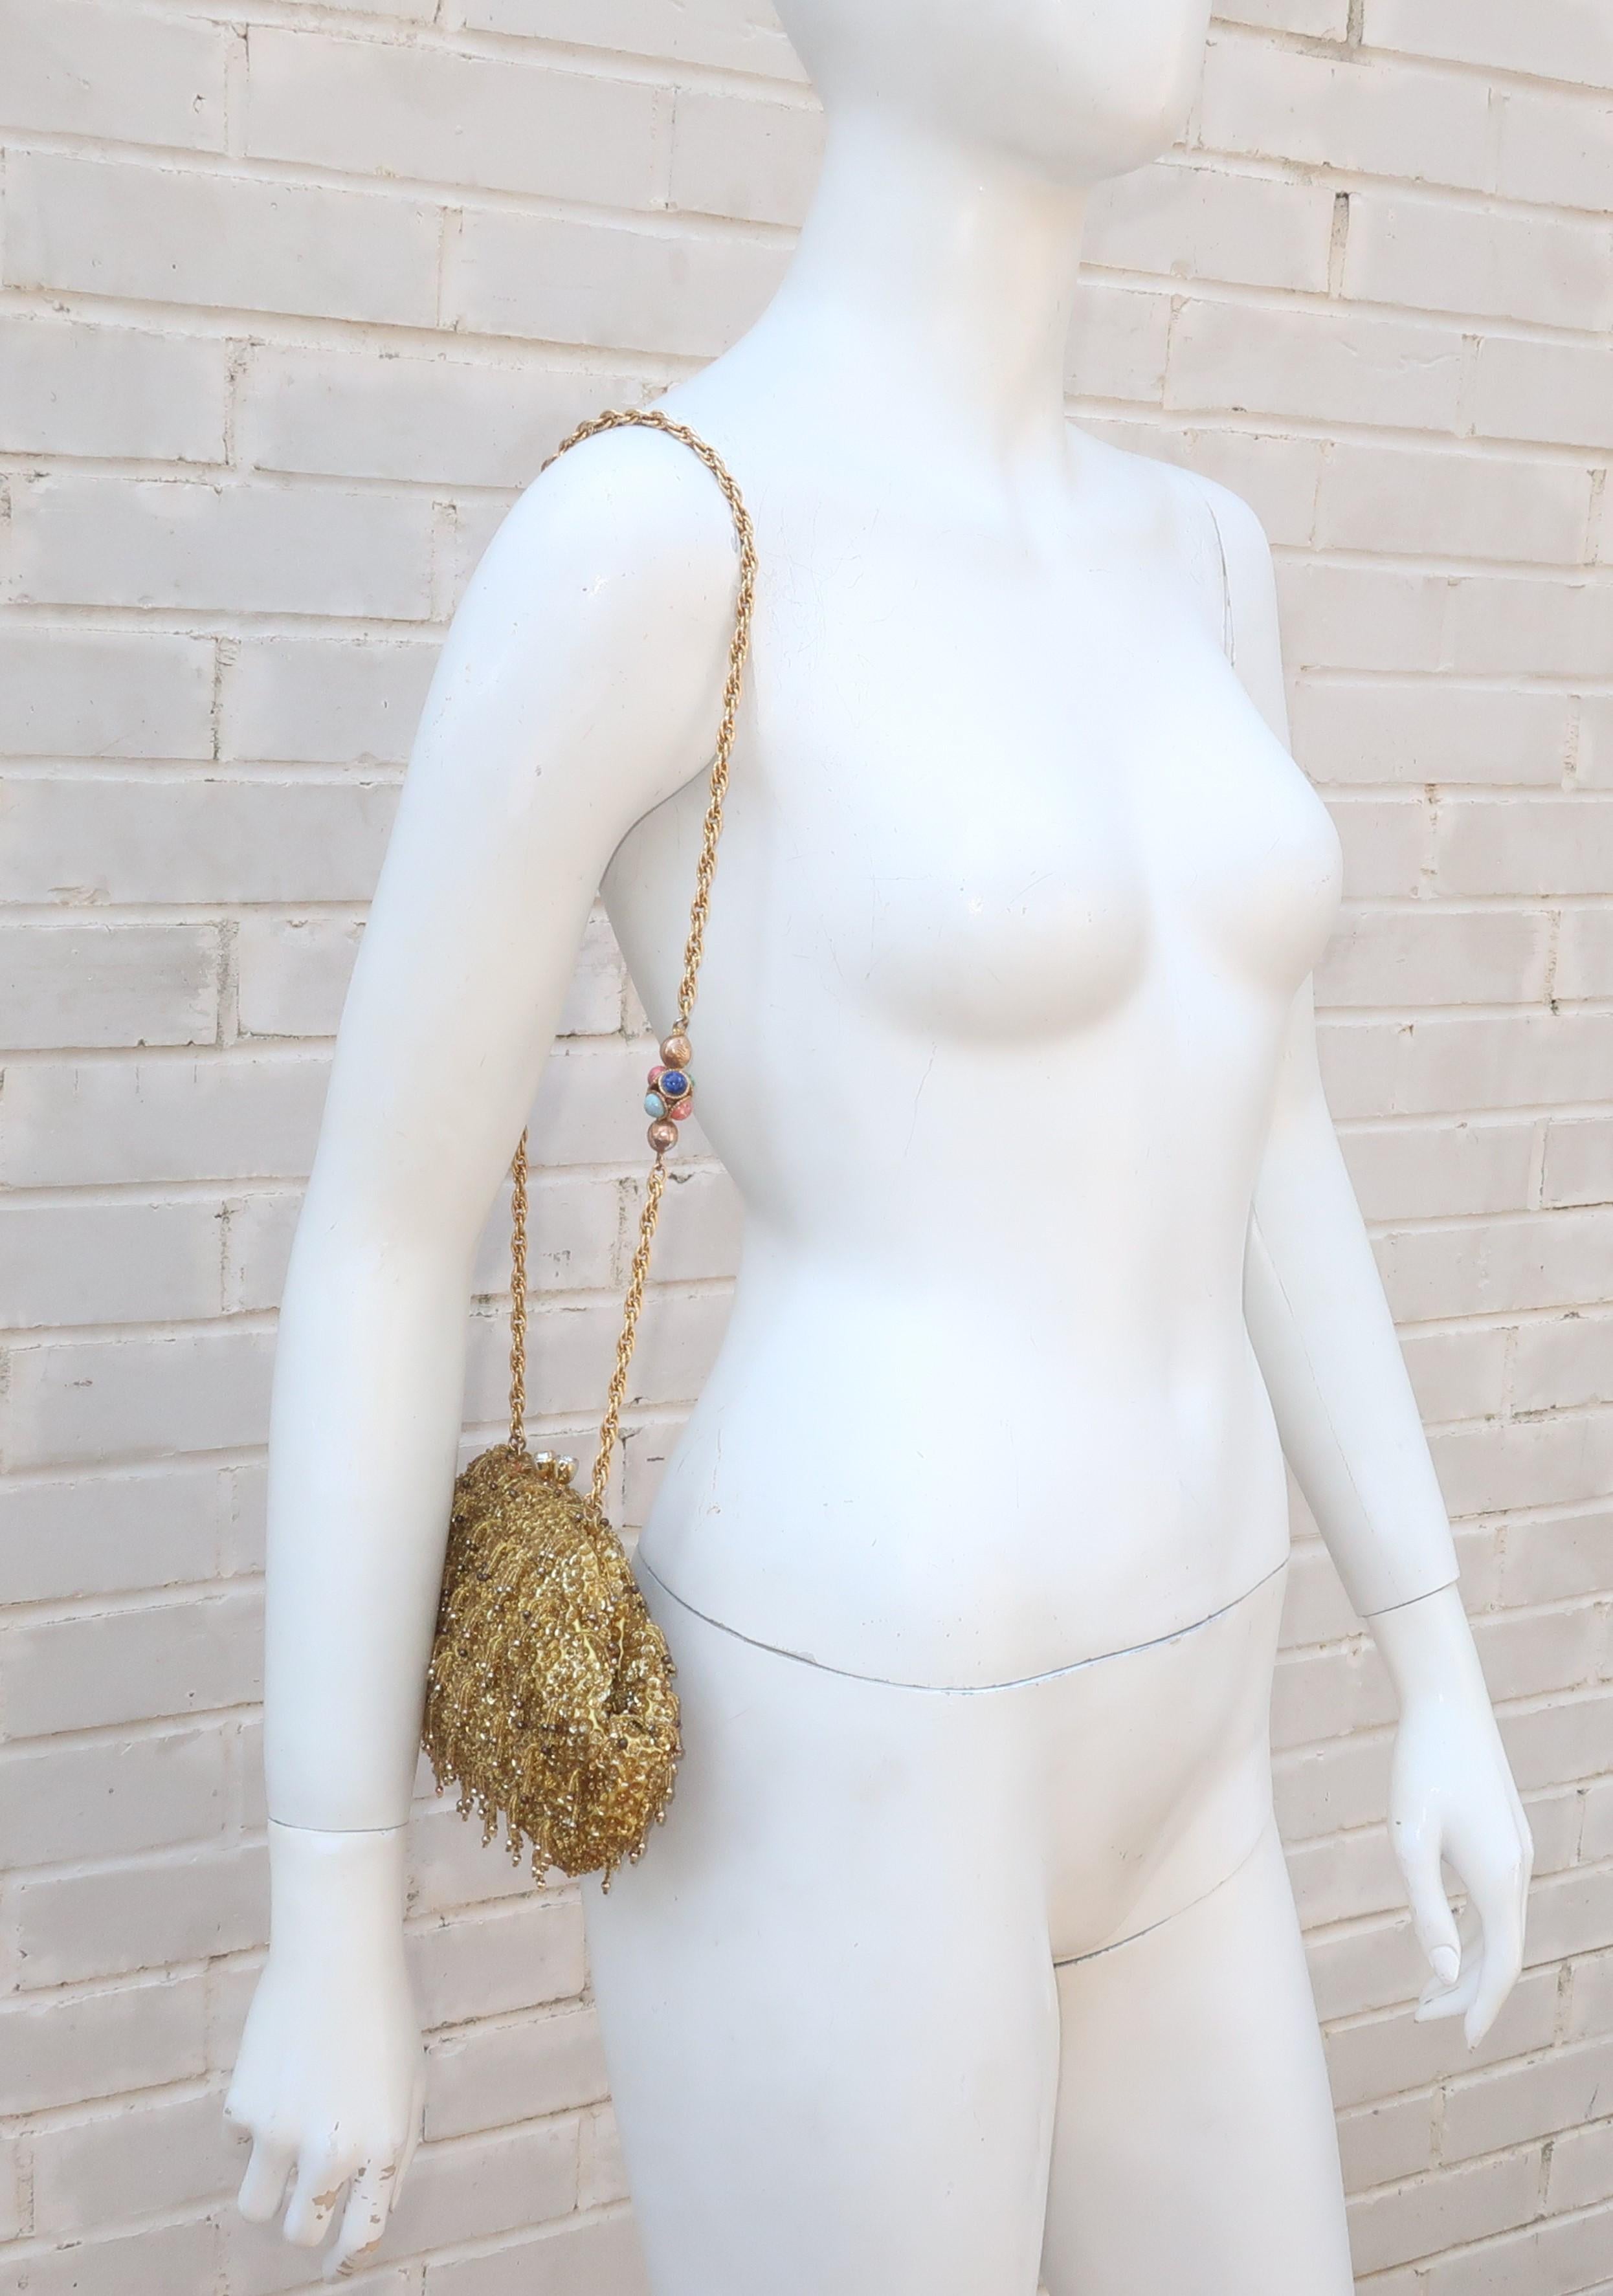 Add a touch of 1960's swinging style to an evening ensemble with this gold sequin and beaded handbag.  The yellow satin body of the handbag is fully embellished with gold sequins and dangling gold seed beads that give the design a fringe effect. 